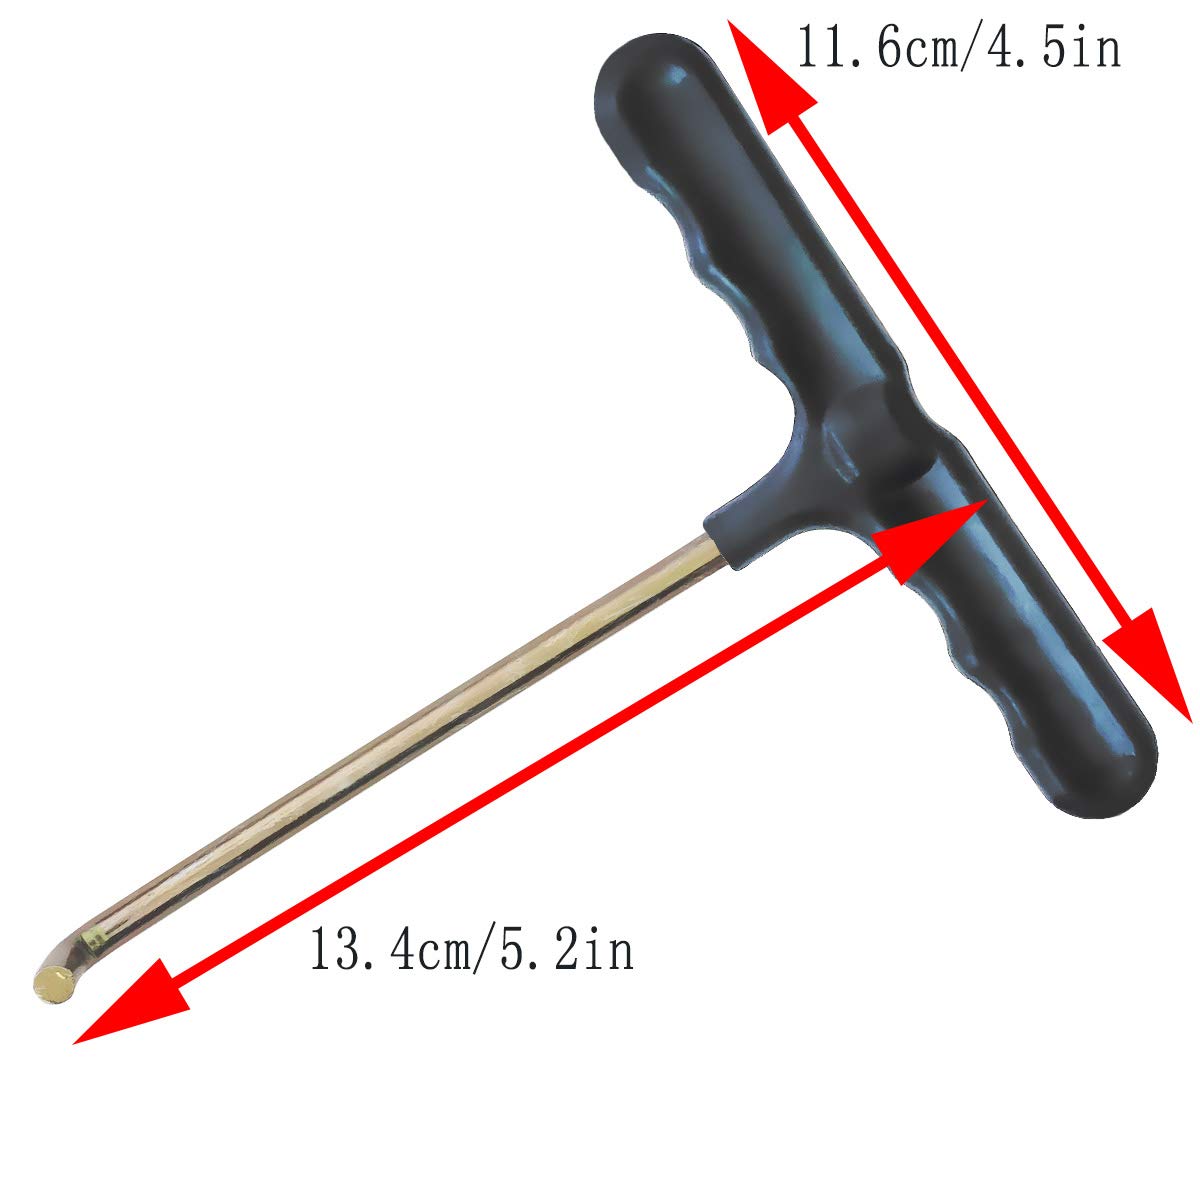 TTSAM Practical Spring Pull Tool， Trampoline Spring Tool, Suitable for Spring Makes Installation/Disassembling